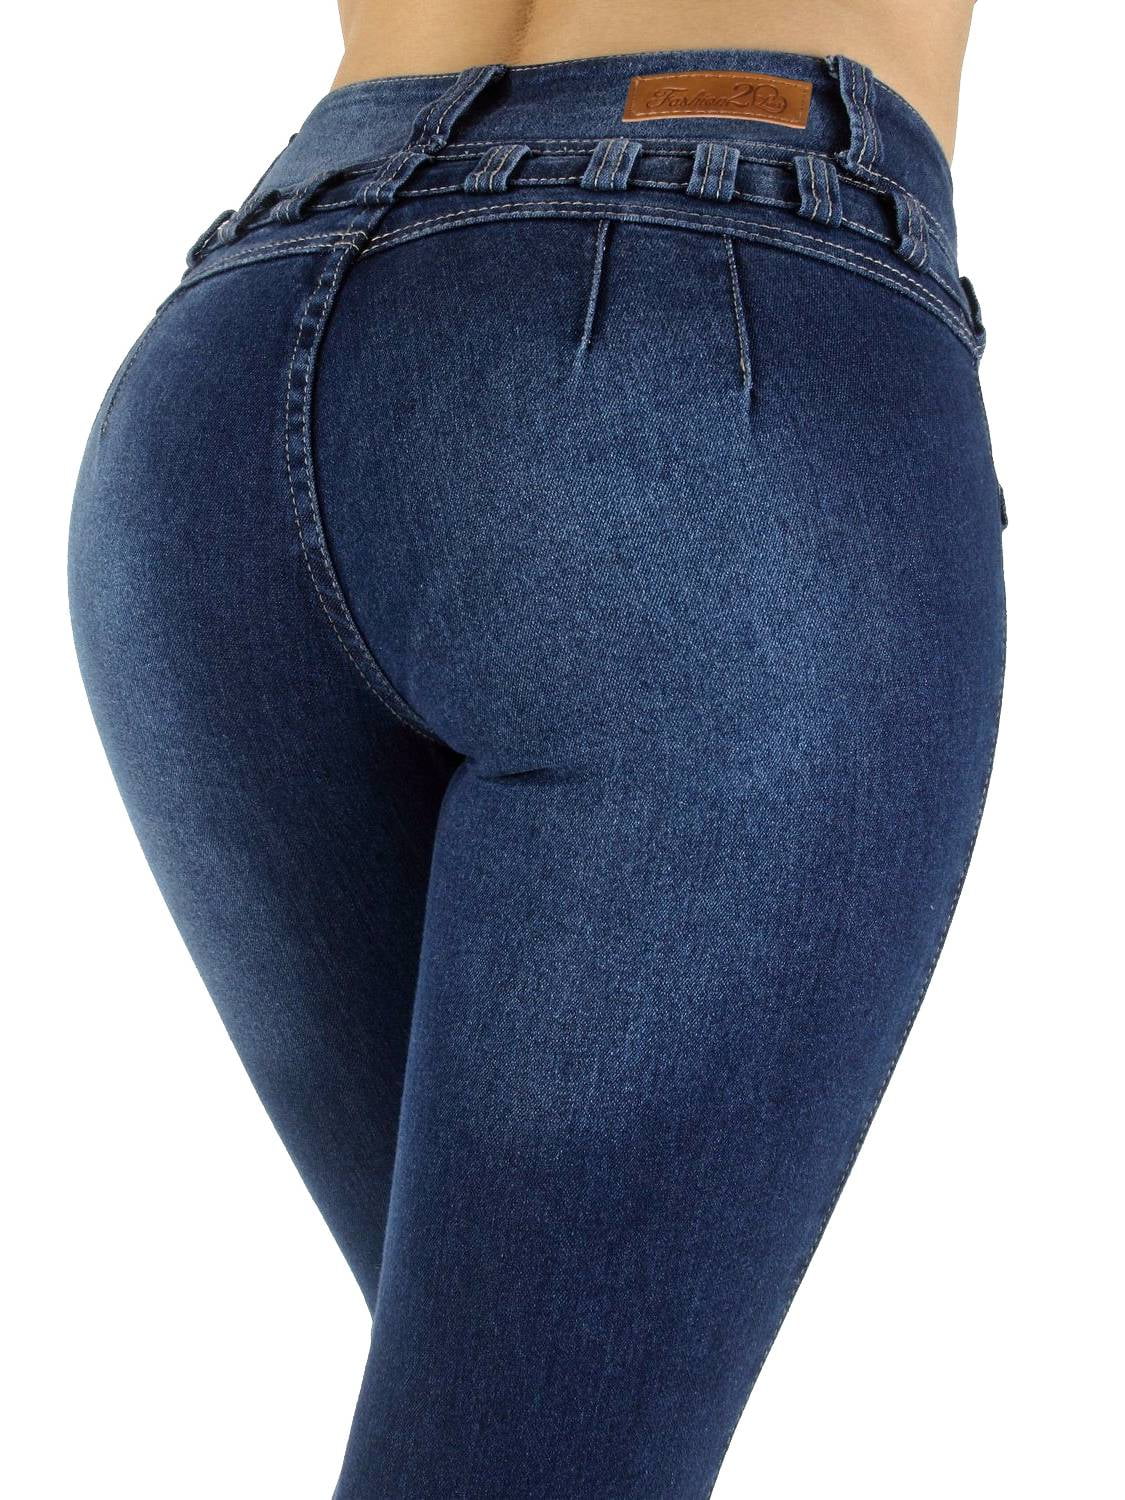 Plus//Junior Size Colombian Design Butt Lifting High Waist Skinny Jeans